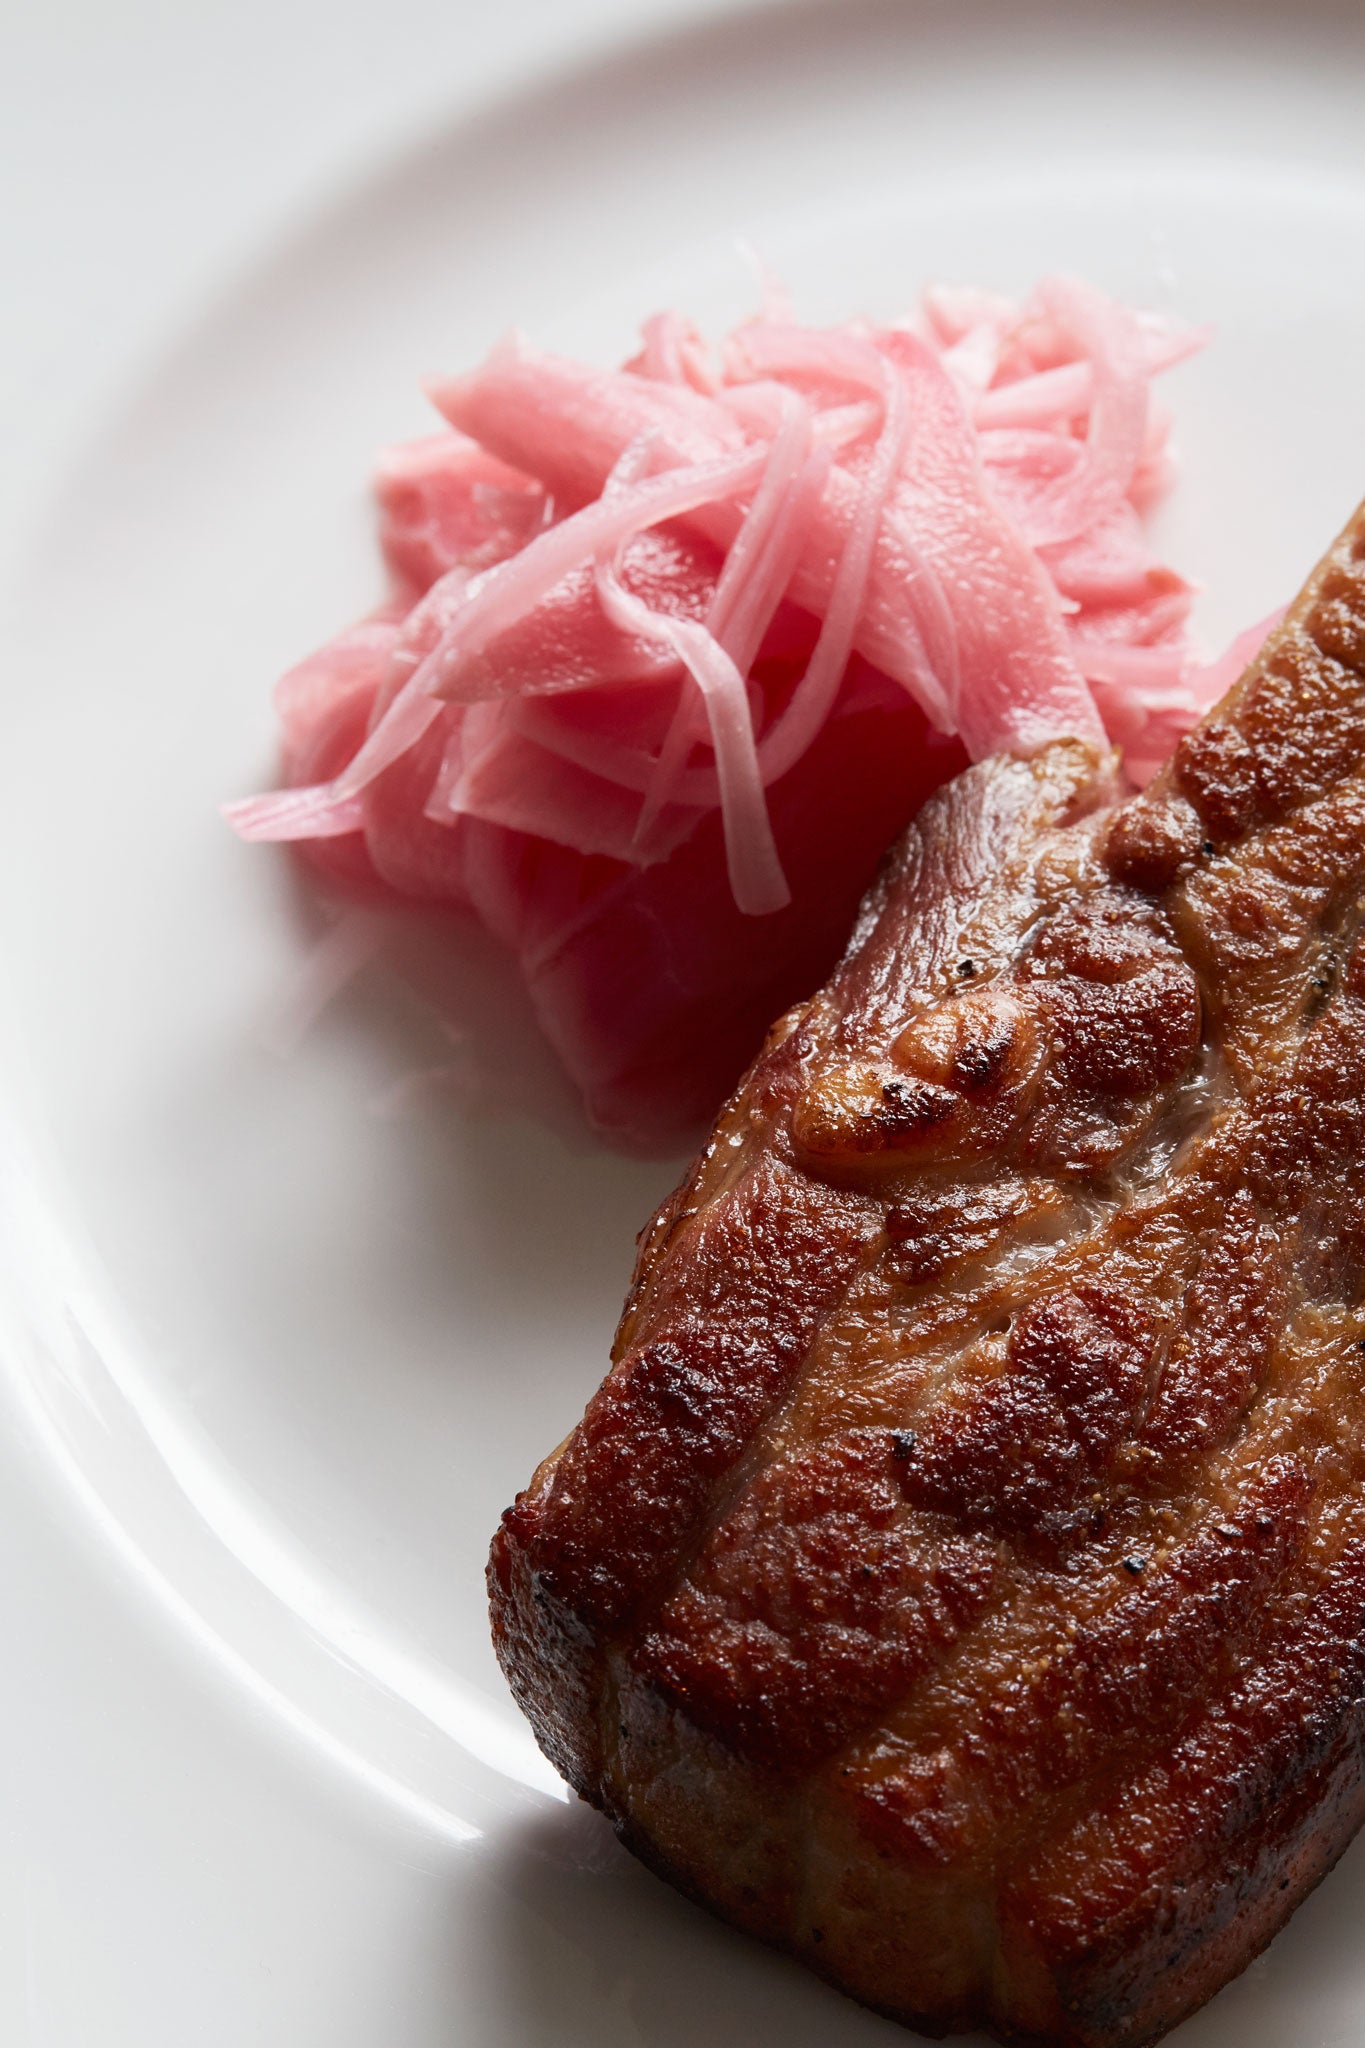 Bacon chop with pickled rhubarb